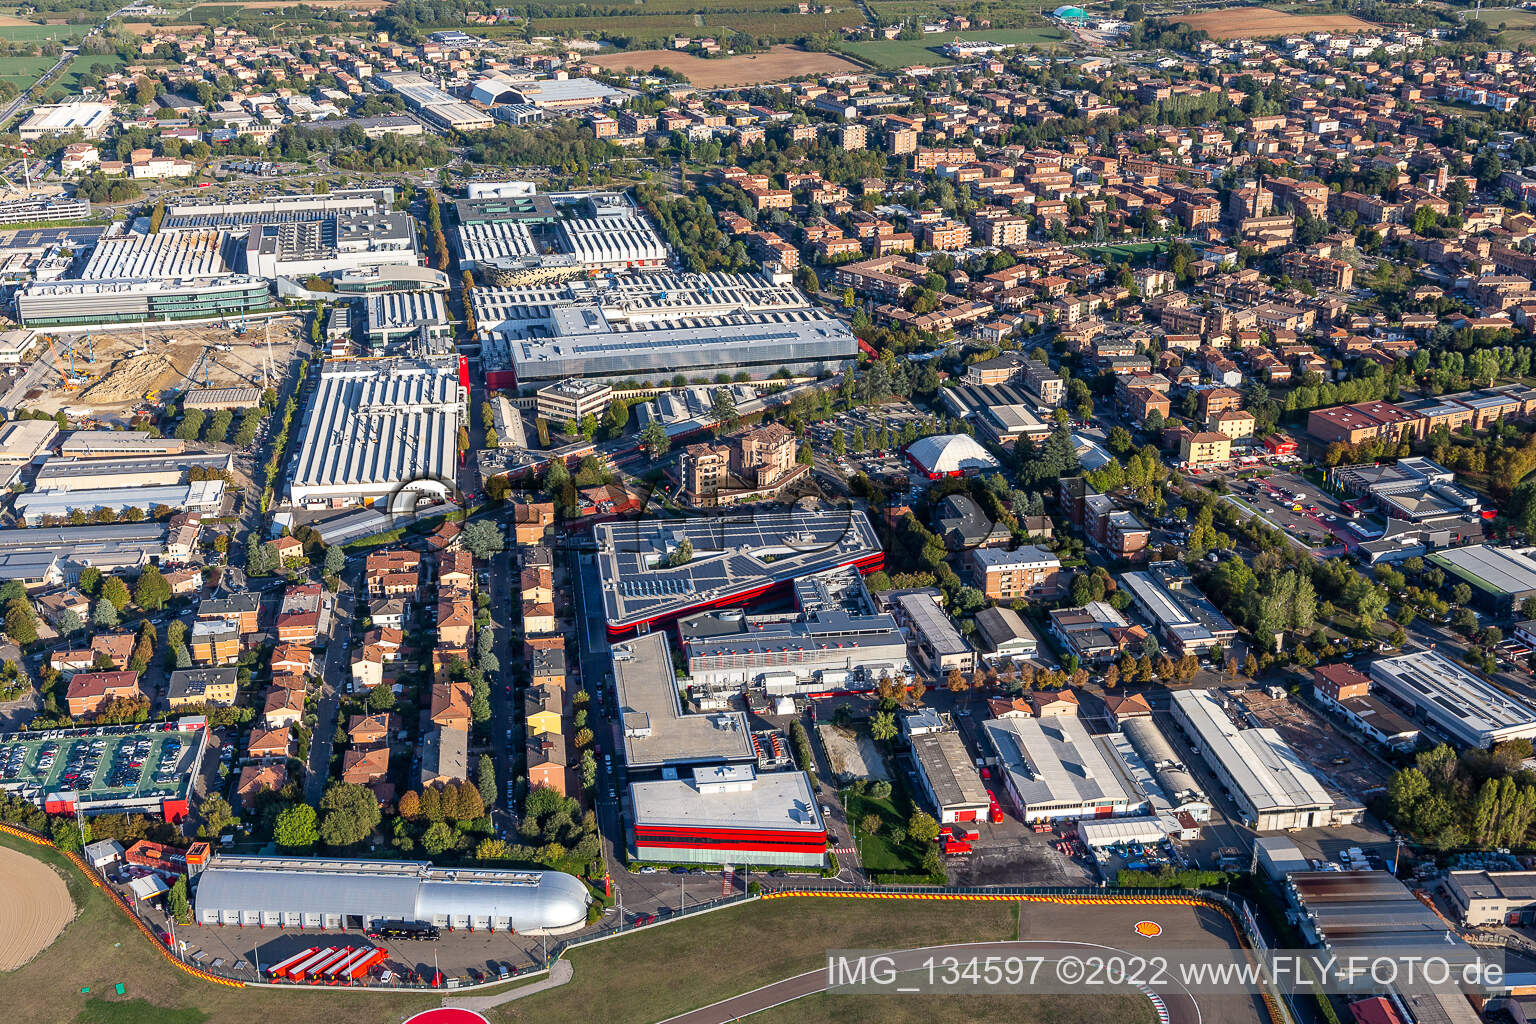 Aerial view of Ferrari SPA factory in Fiorano Modenese in the state Modena, Italy